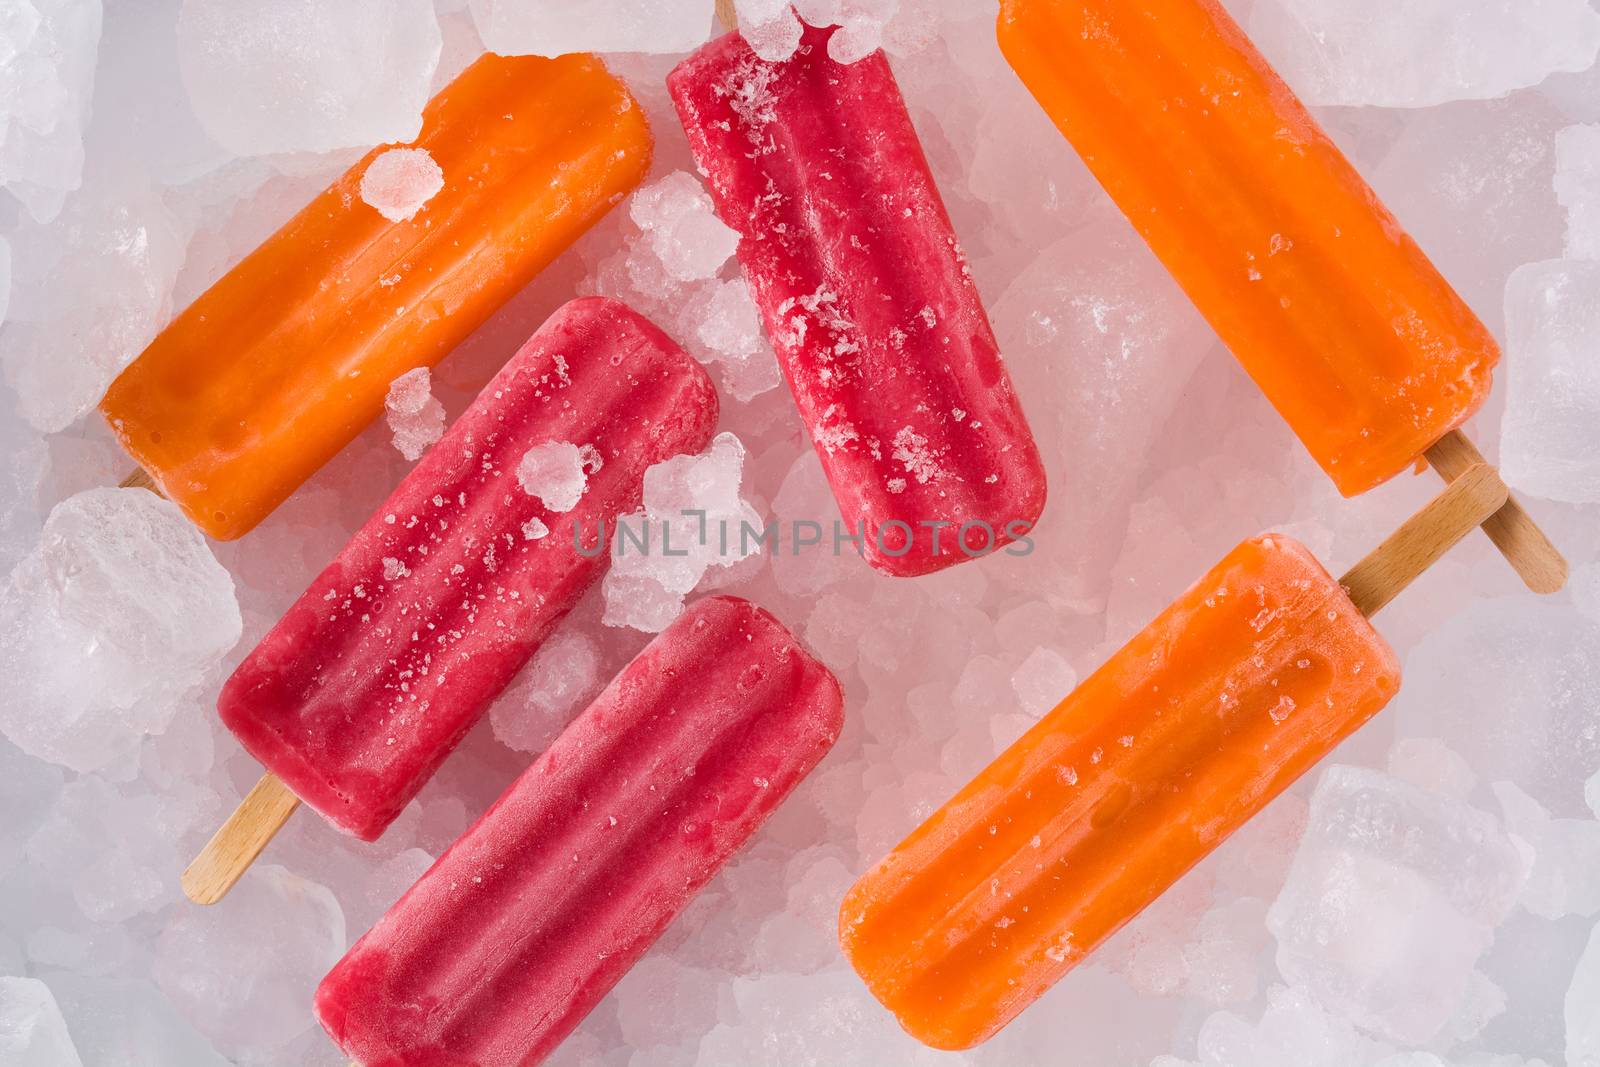 Orange and strawberry popsicles on ice cubes. Top view. Copyspace by chandlervid85